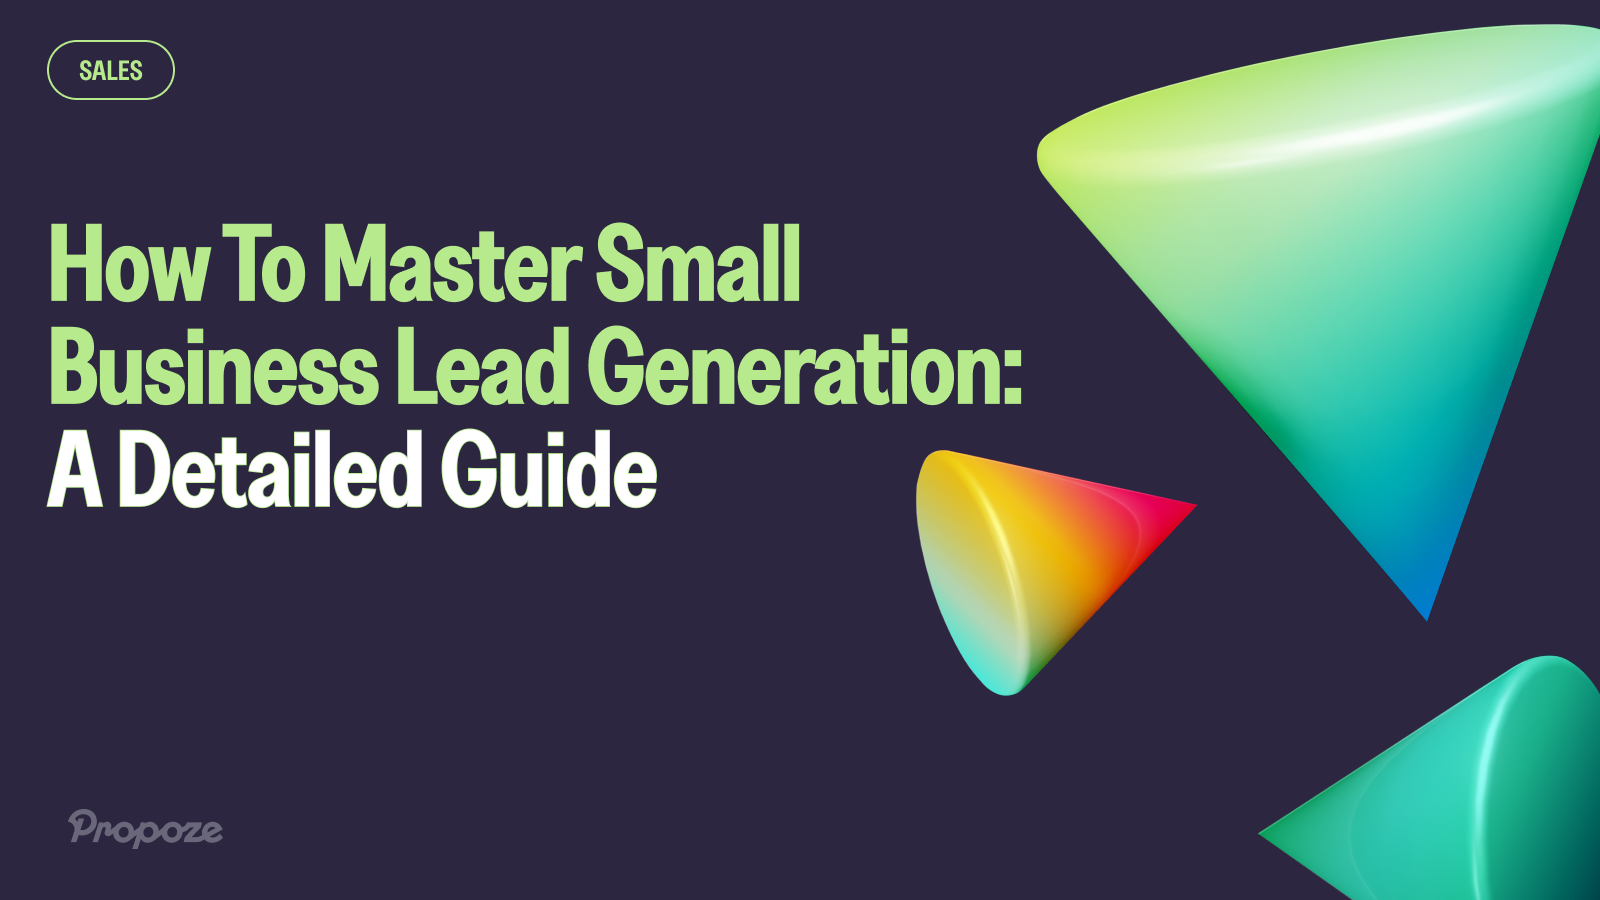 How To Master Small Business Lead Generation: A Detailed Guide